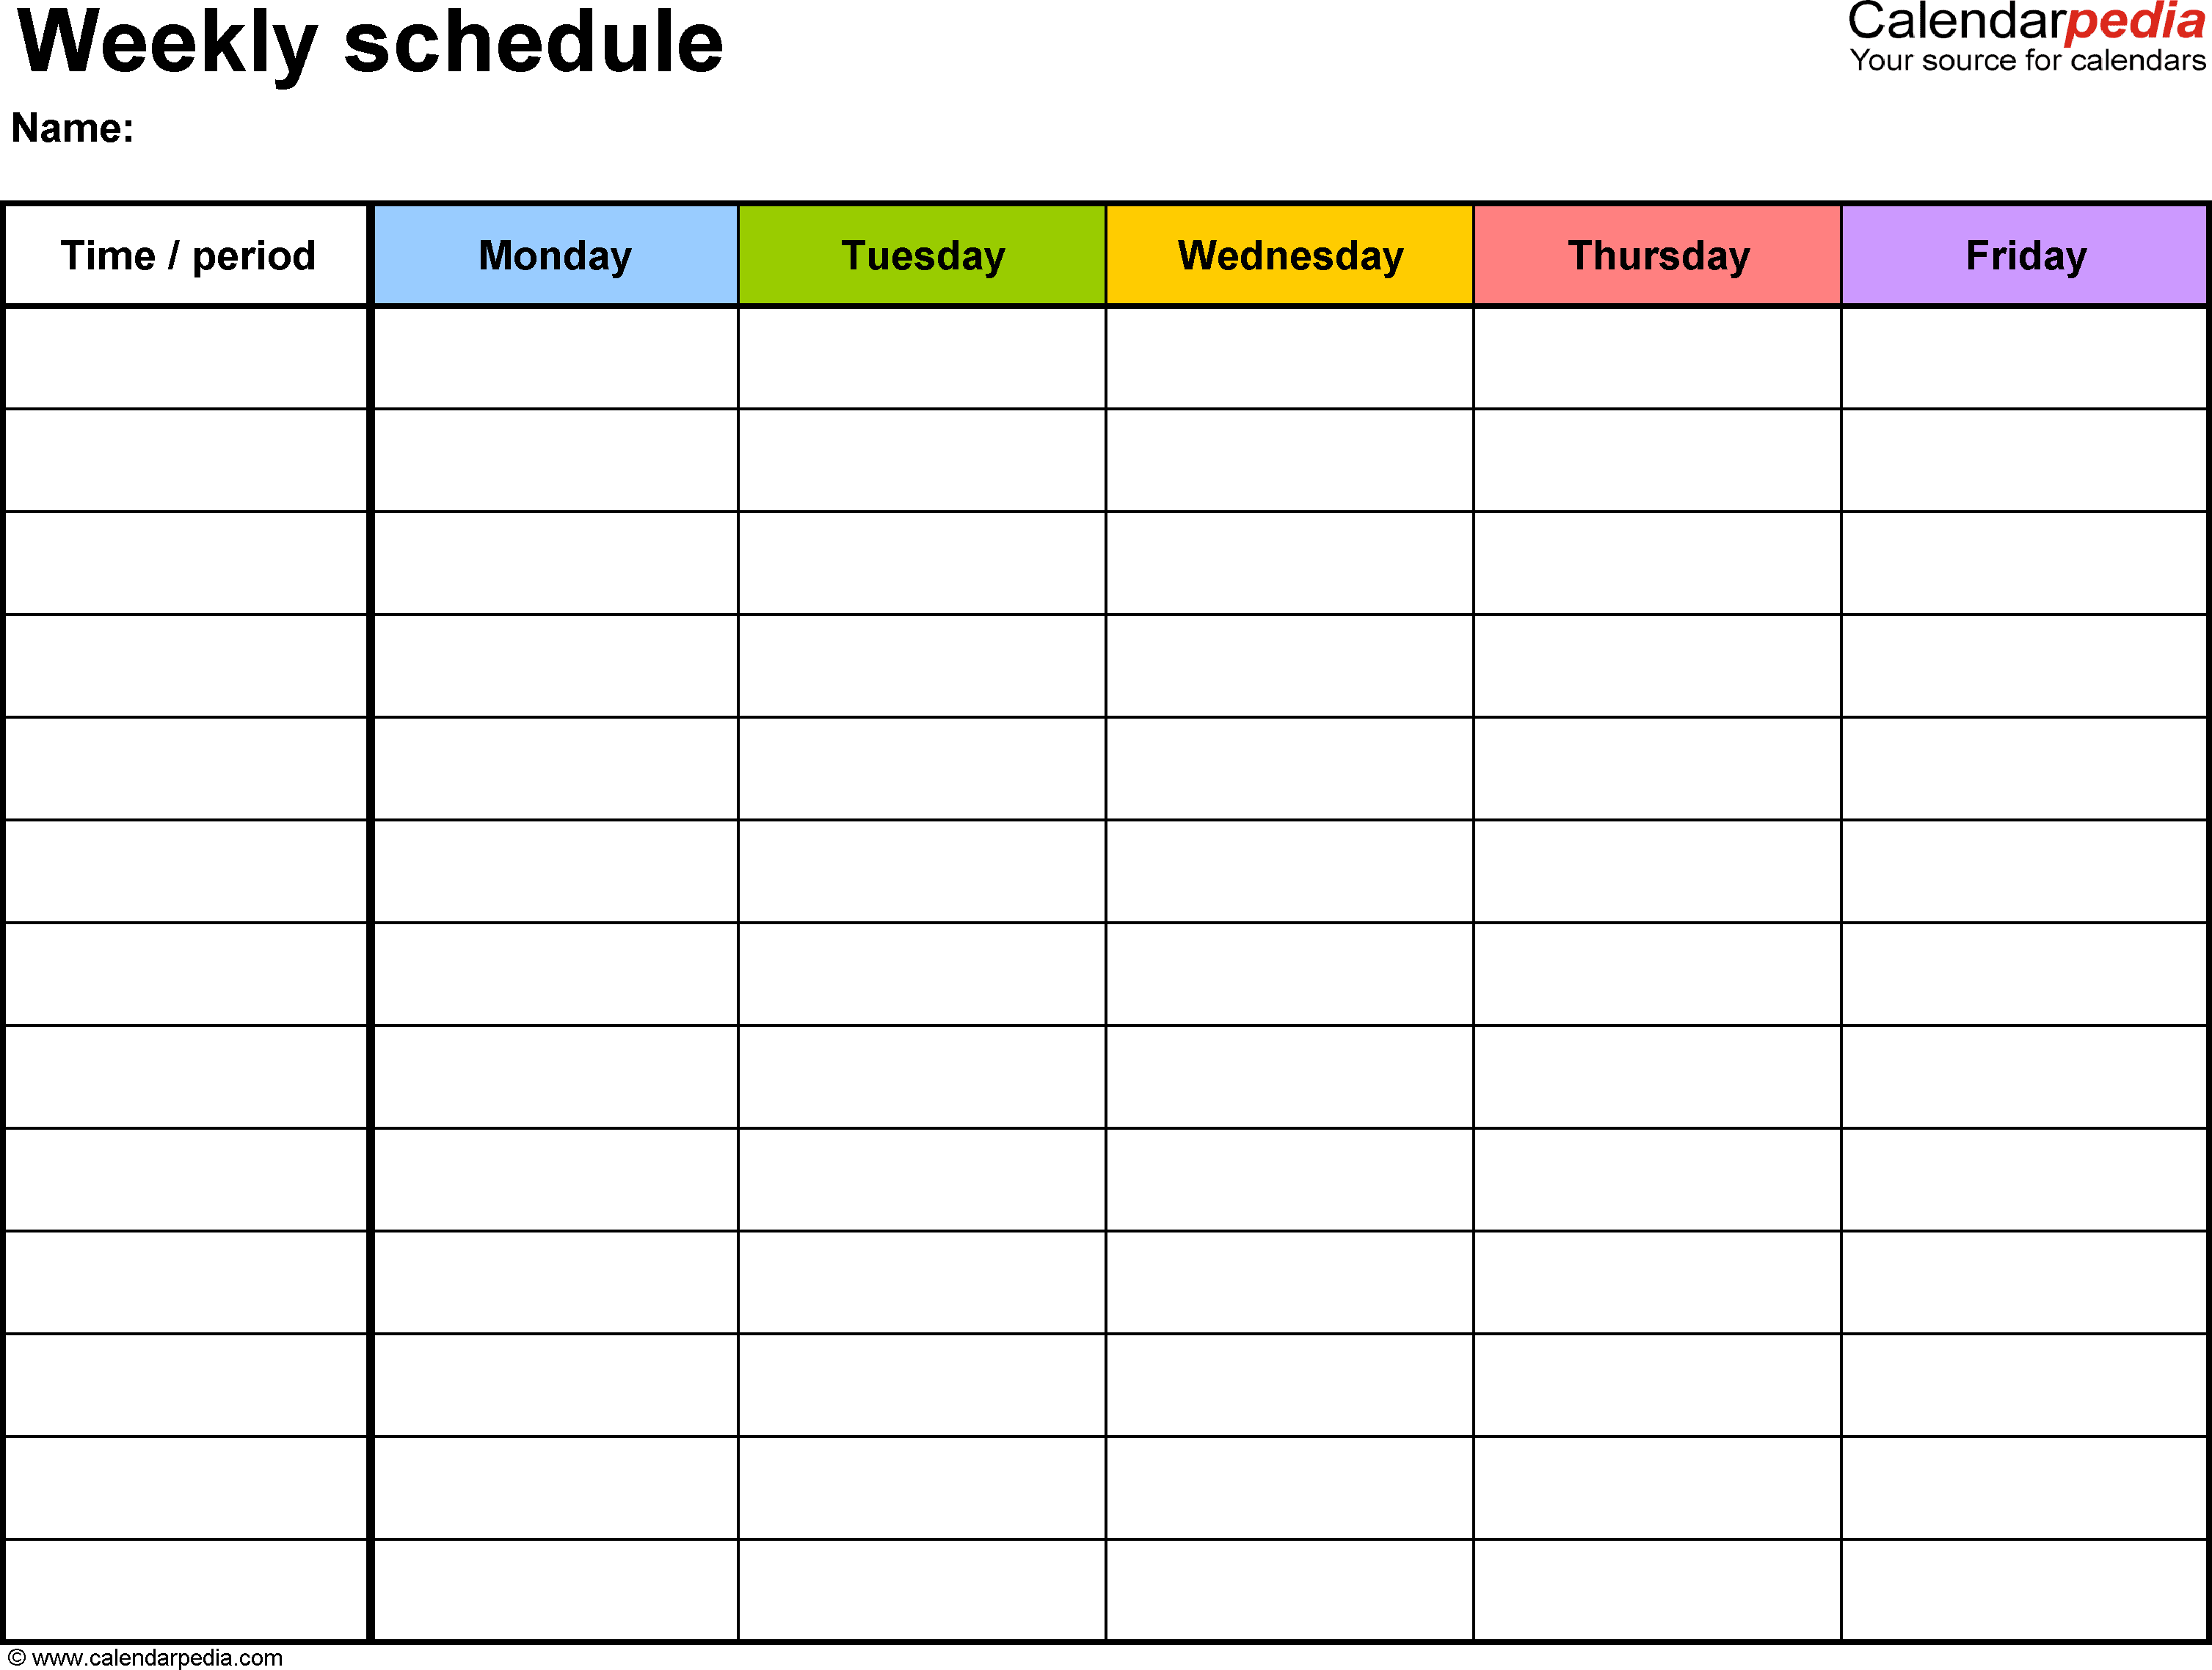 Free Weekly Schedule Templates for Excel